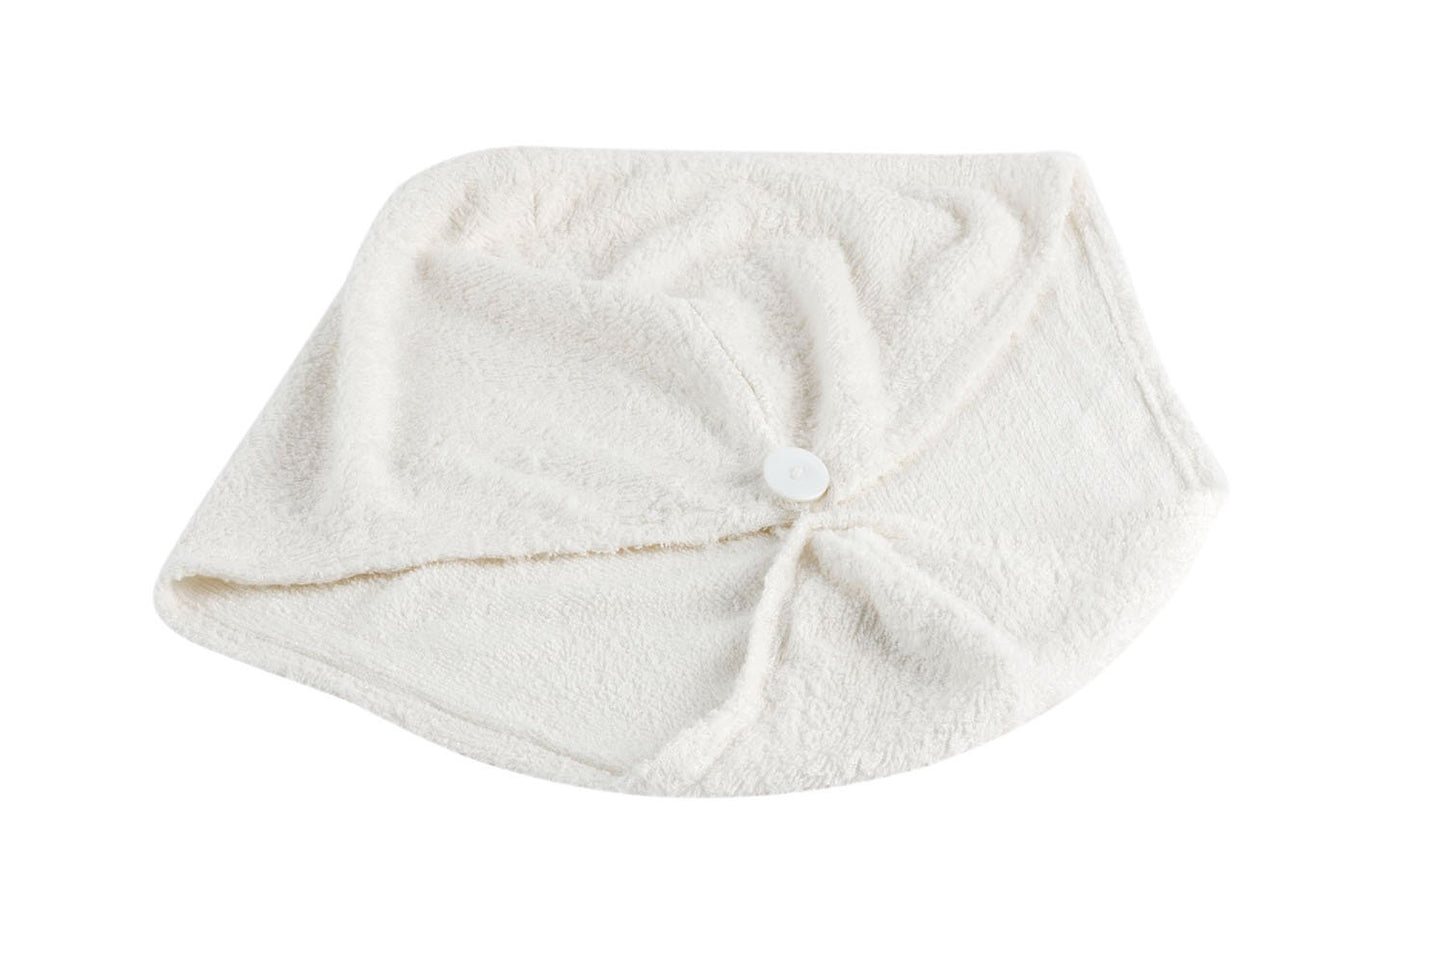 Hair turban buttoned up on white background